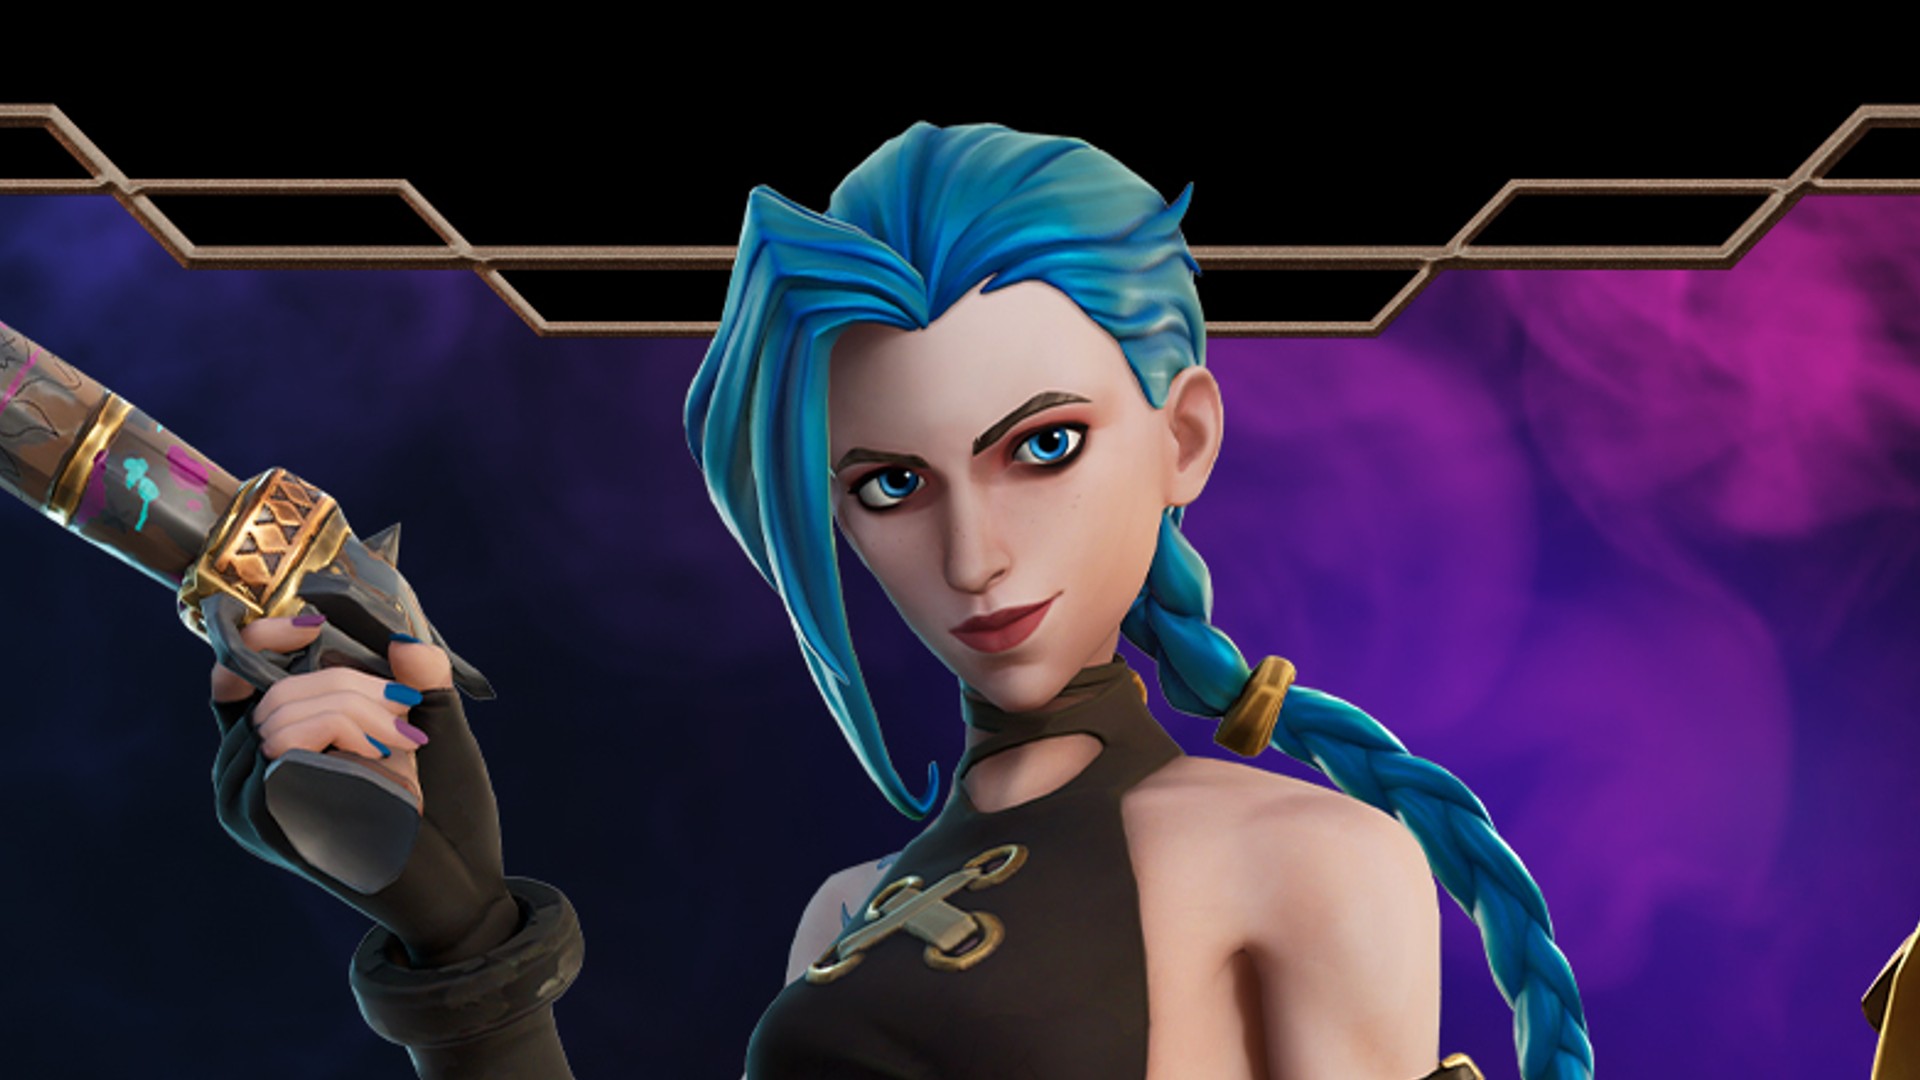  League of Legend's Jinx joins Fortnite in rare crossover for Riot 